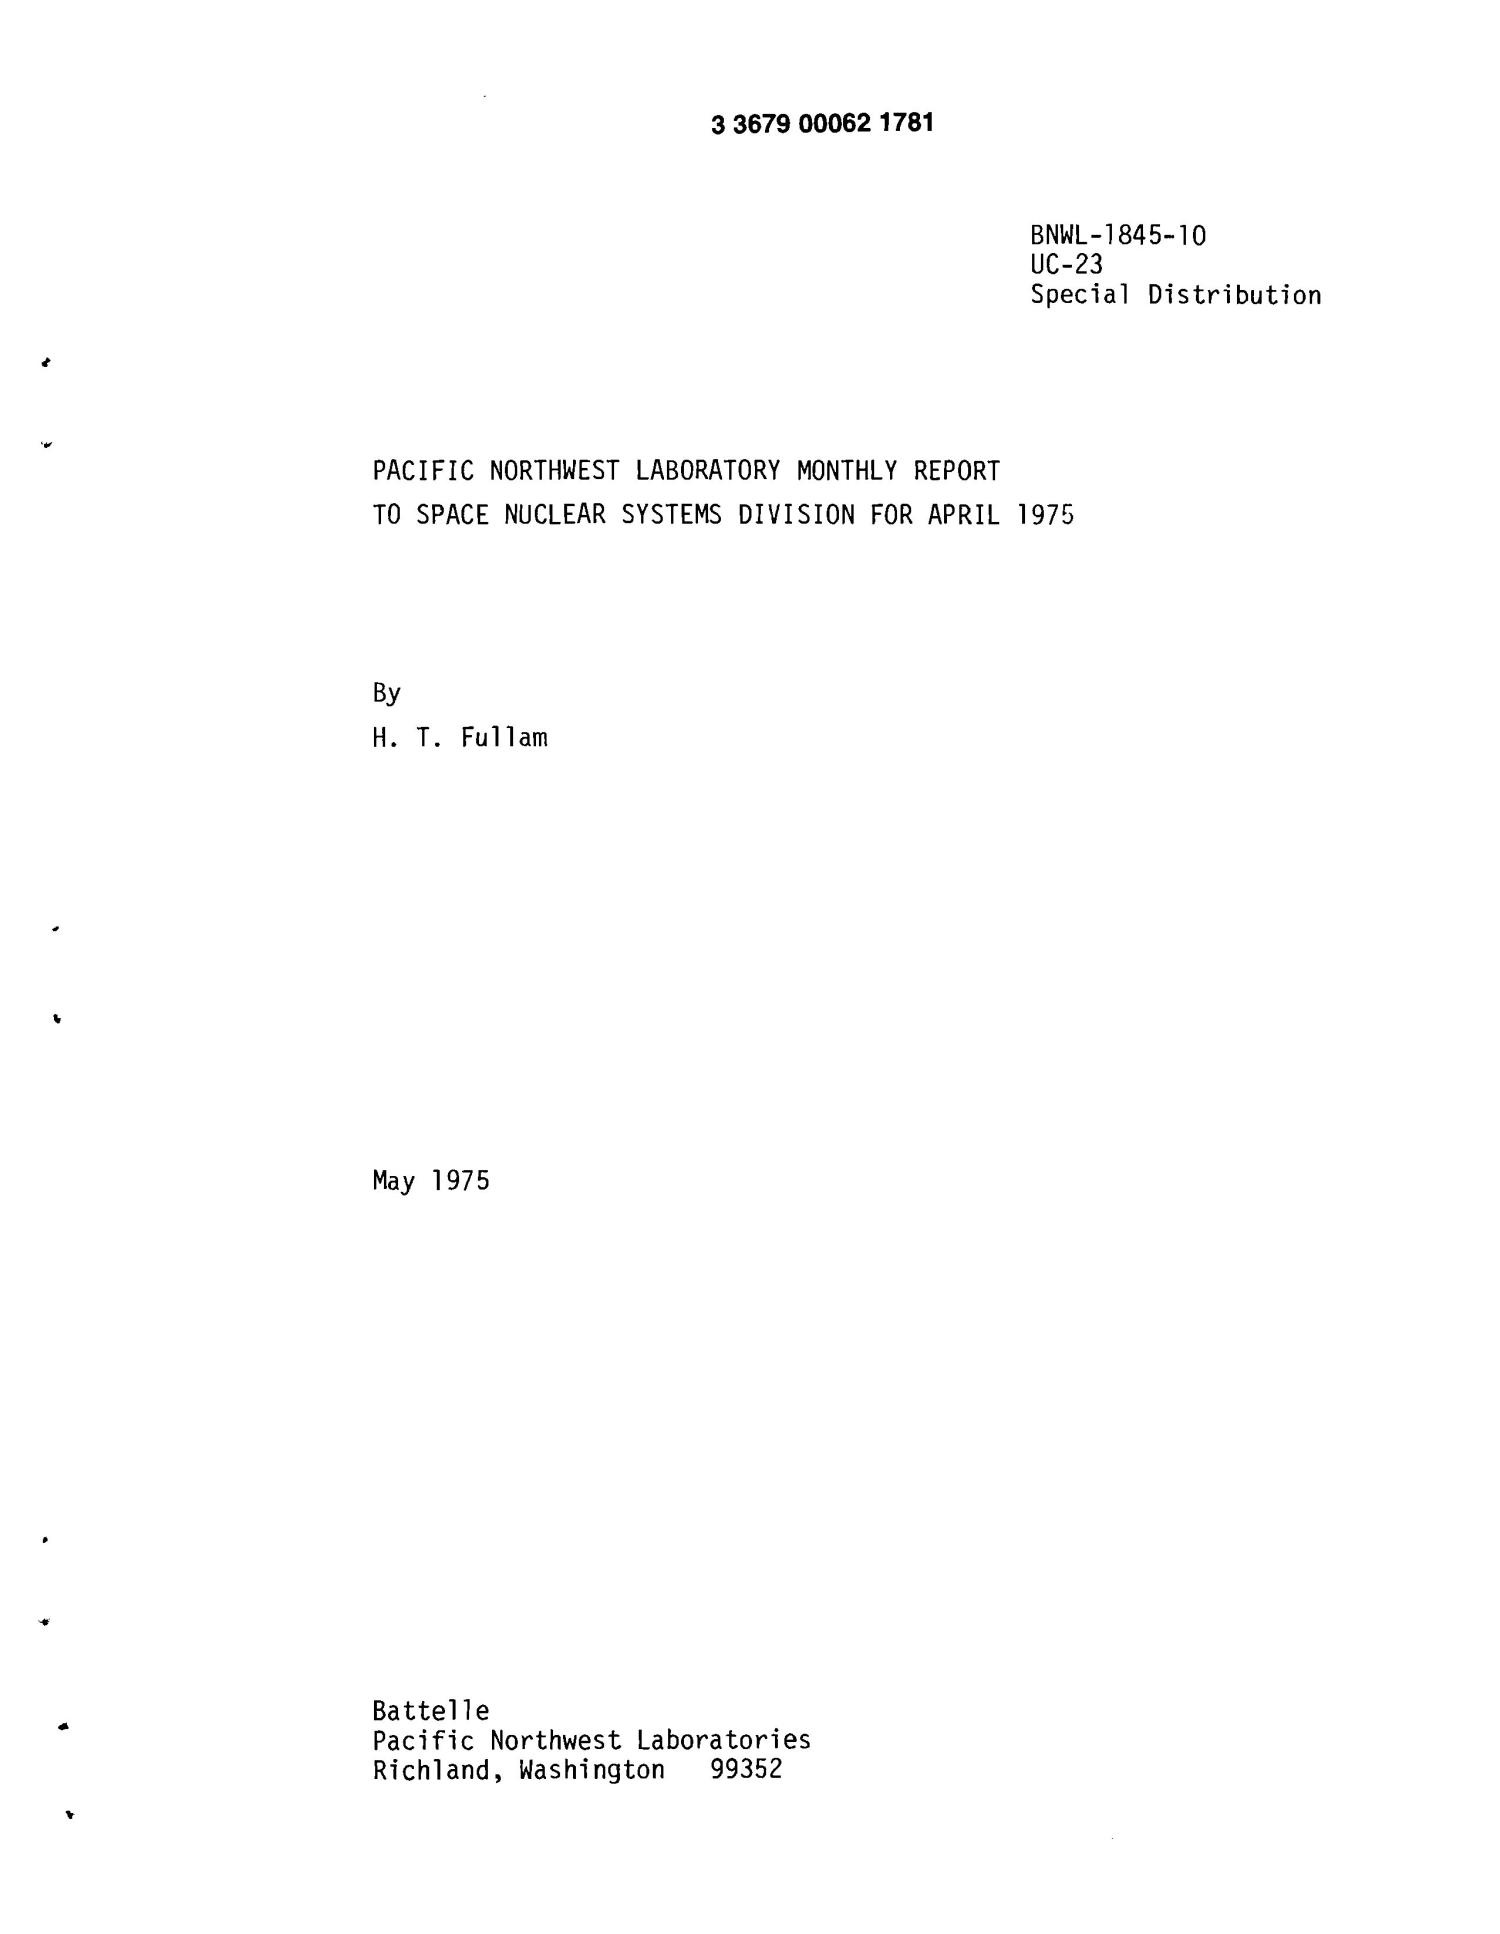 Pacific Northwest Laboratory monthly report to Space Nuclear Systems Division for April 1975
                                                
                                                    [Sequence #]: 4 of 23
                                                